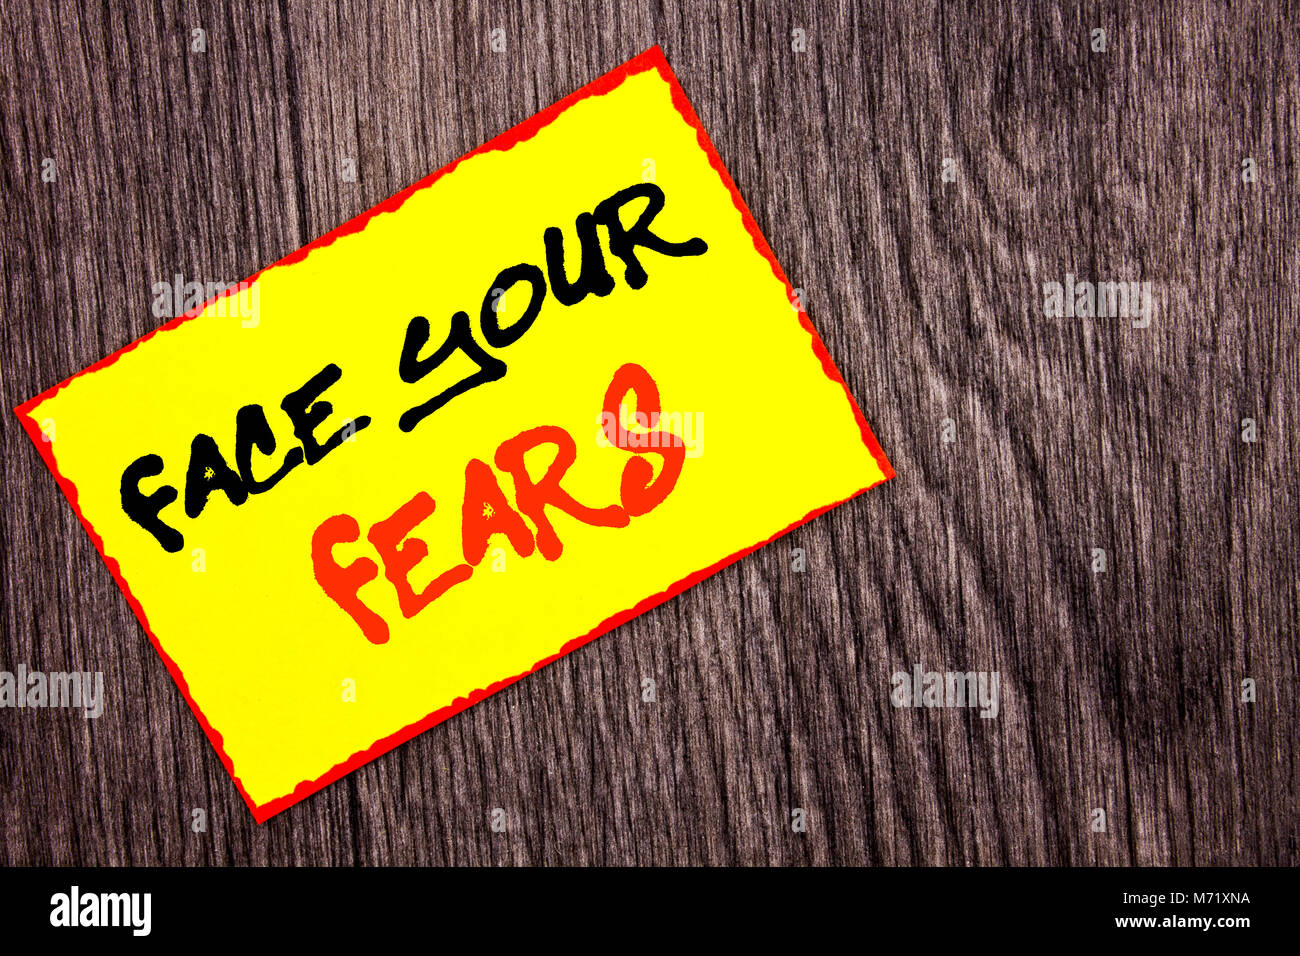 Conceptual hand writing text showing Face Your Fears. Concept meaning Challenge Fear Fourage Confidence Brave Bravery written Yellow Sticky Note Paper Stock Photo